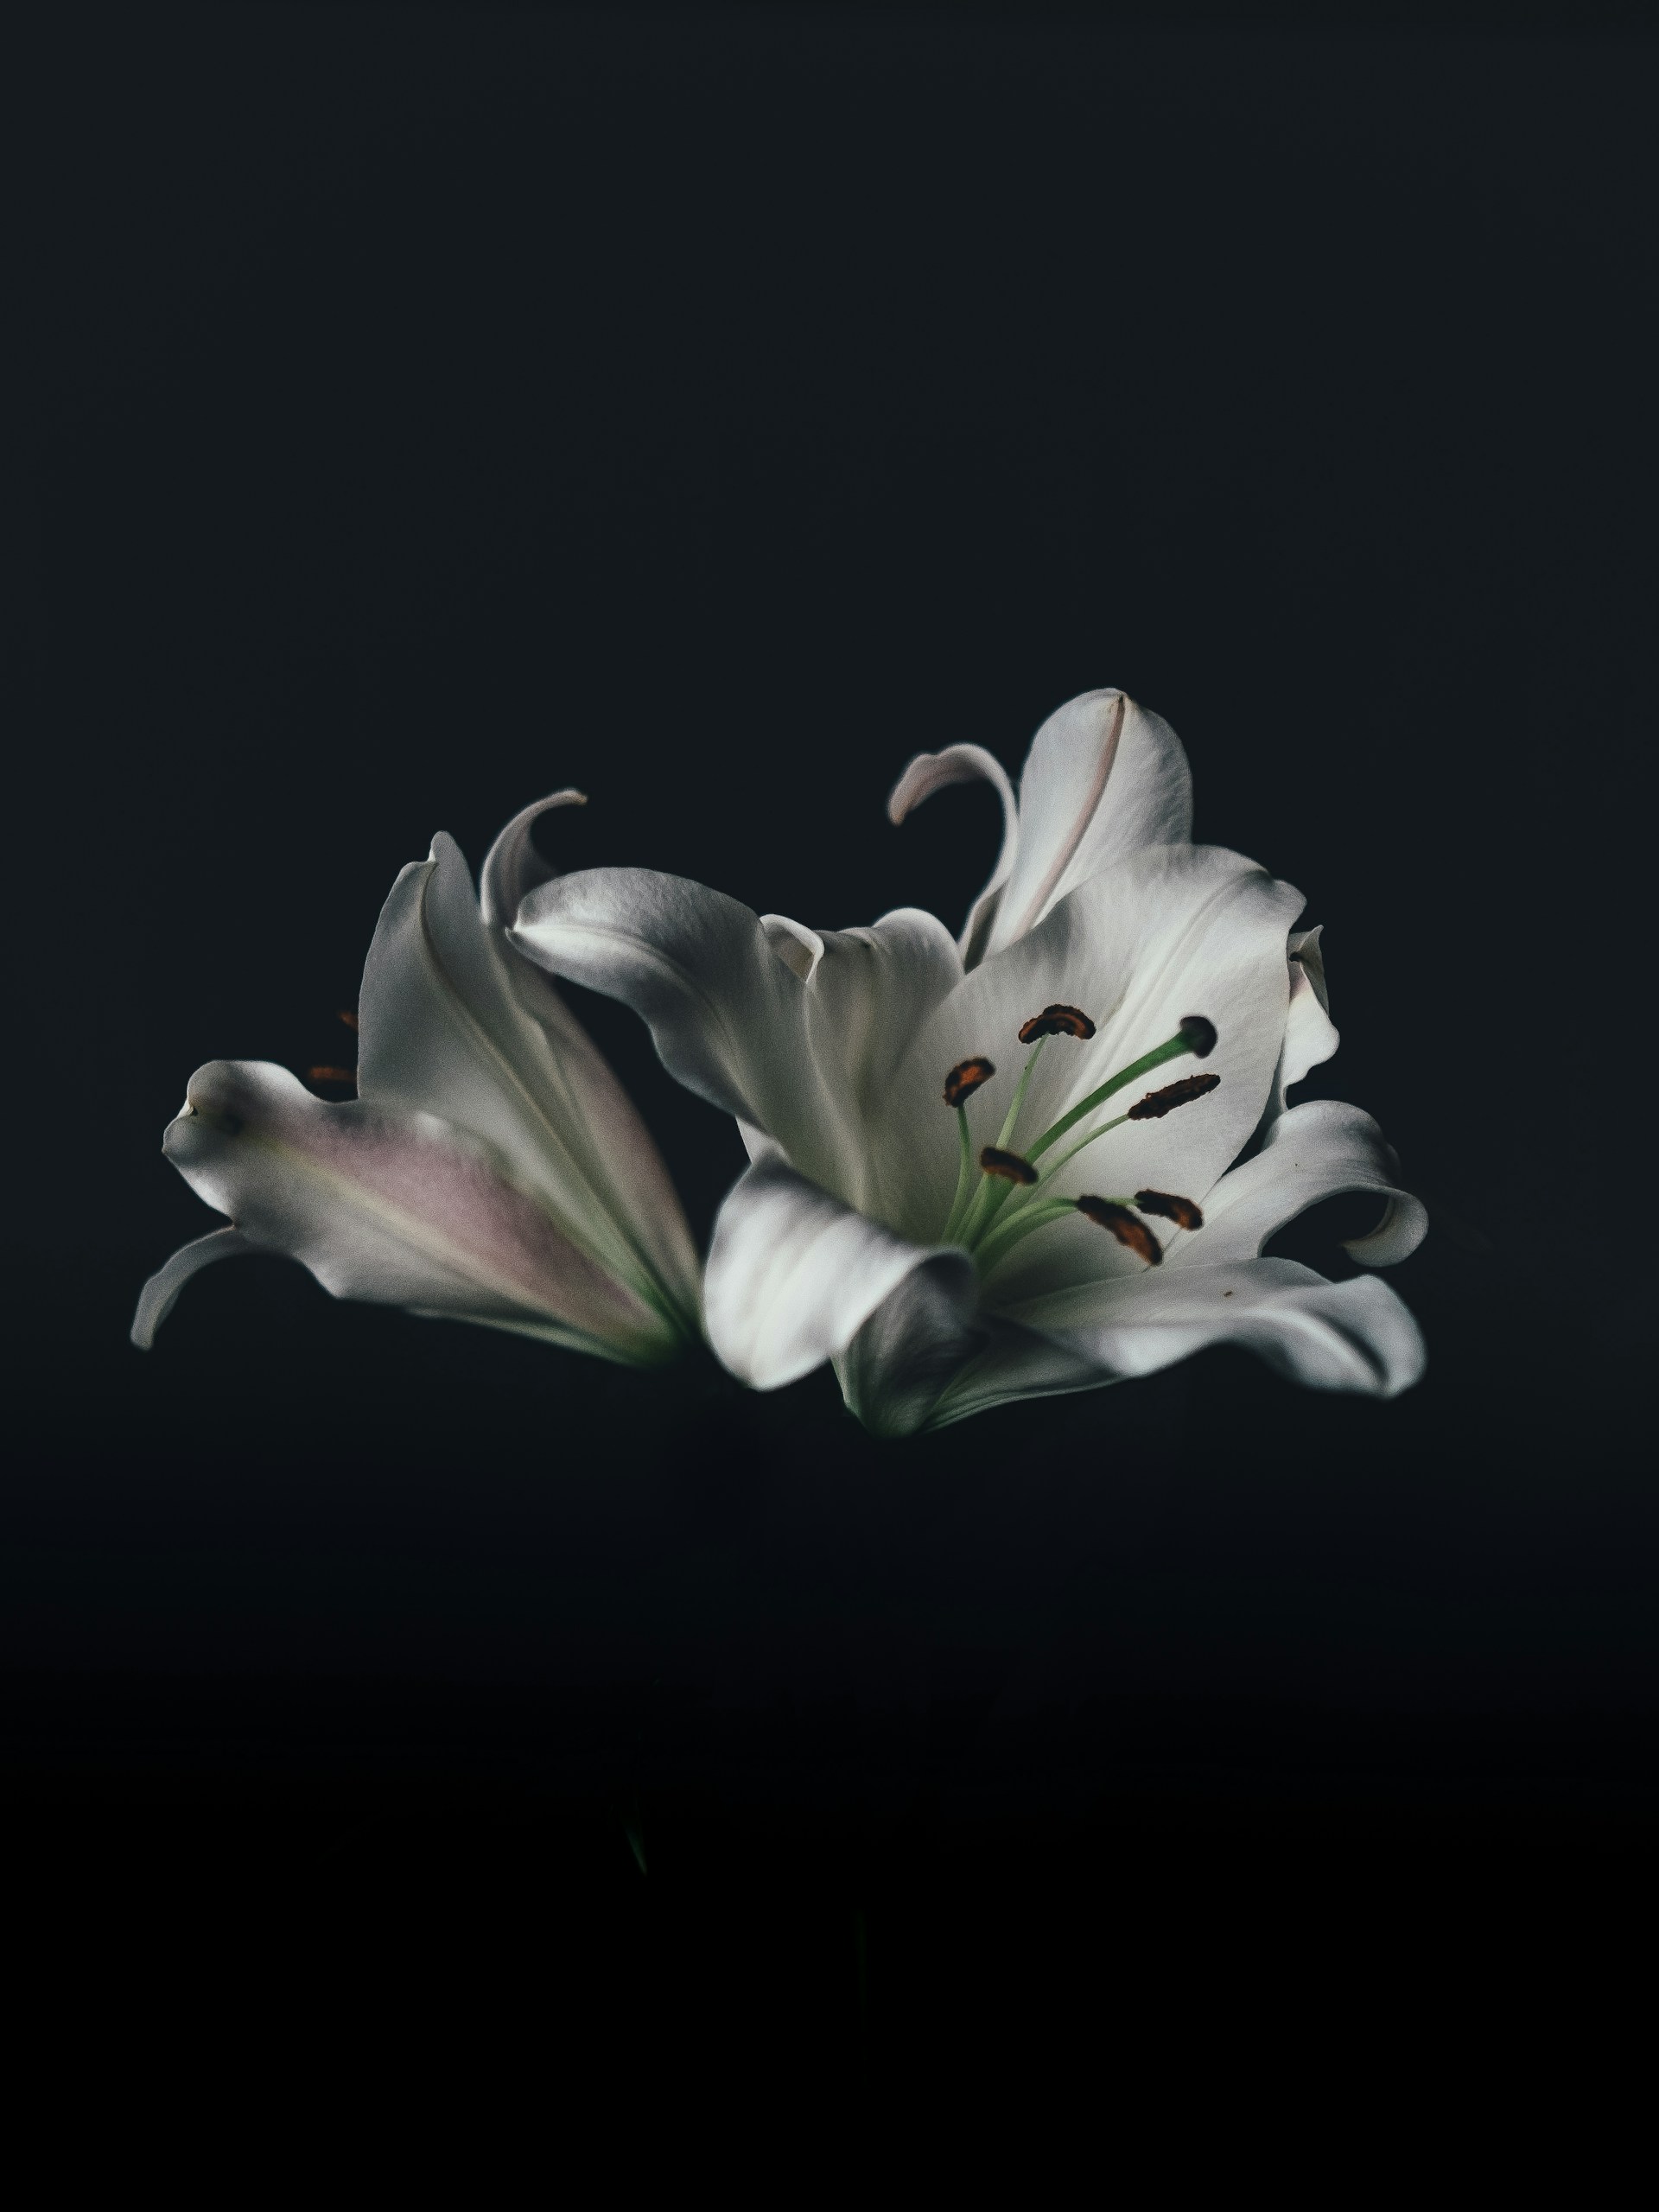 Abstract Floral Black Background 1920x2560